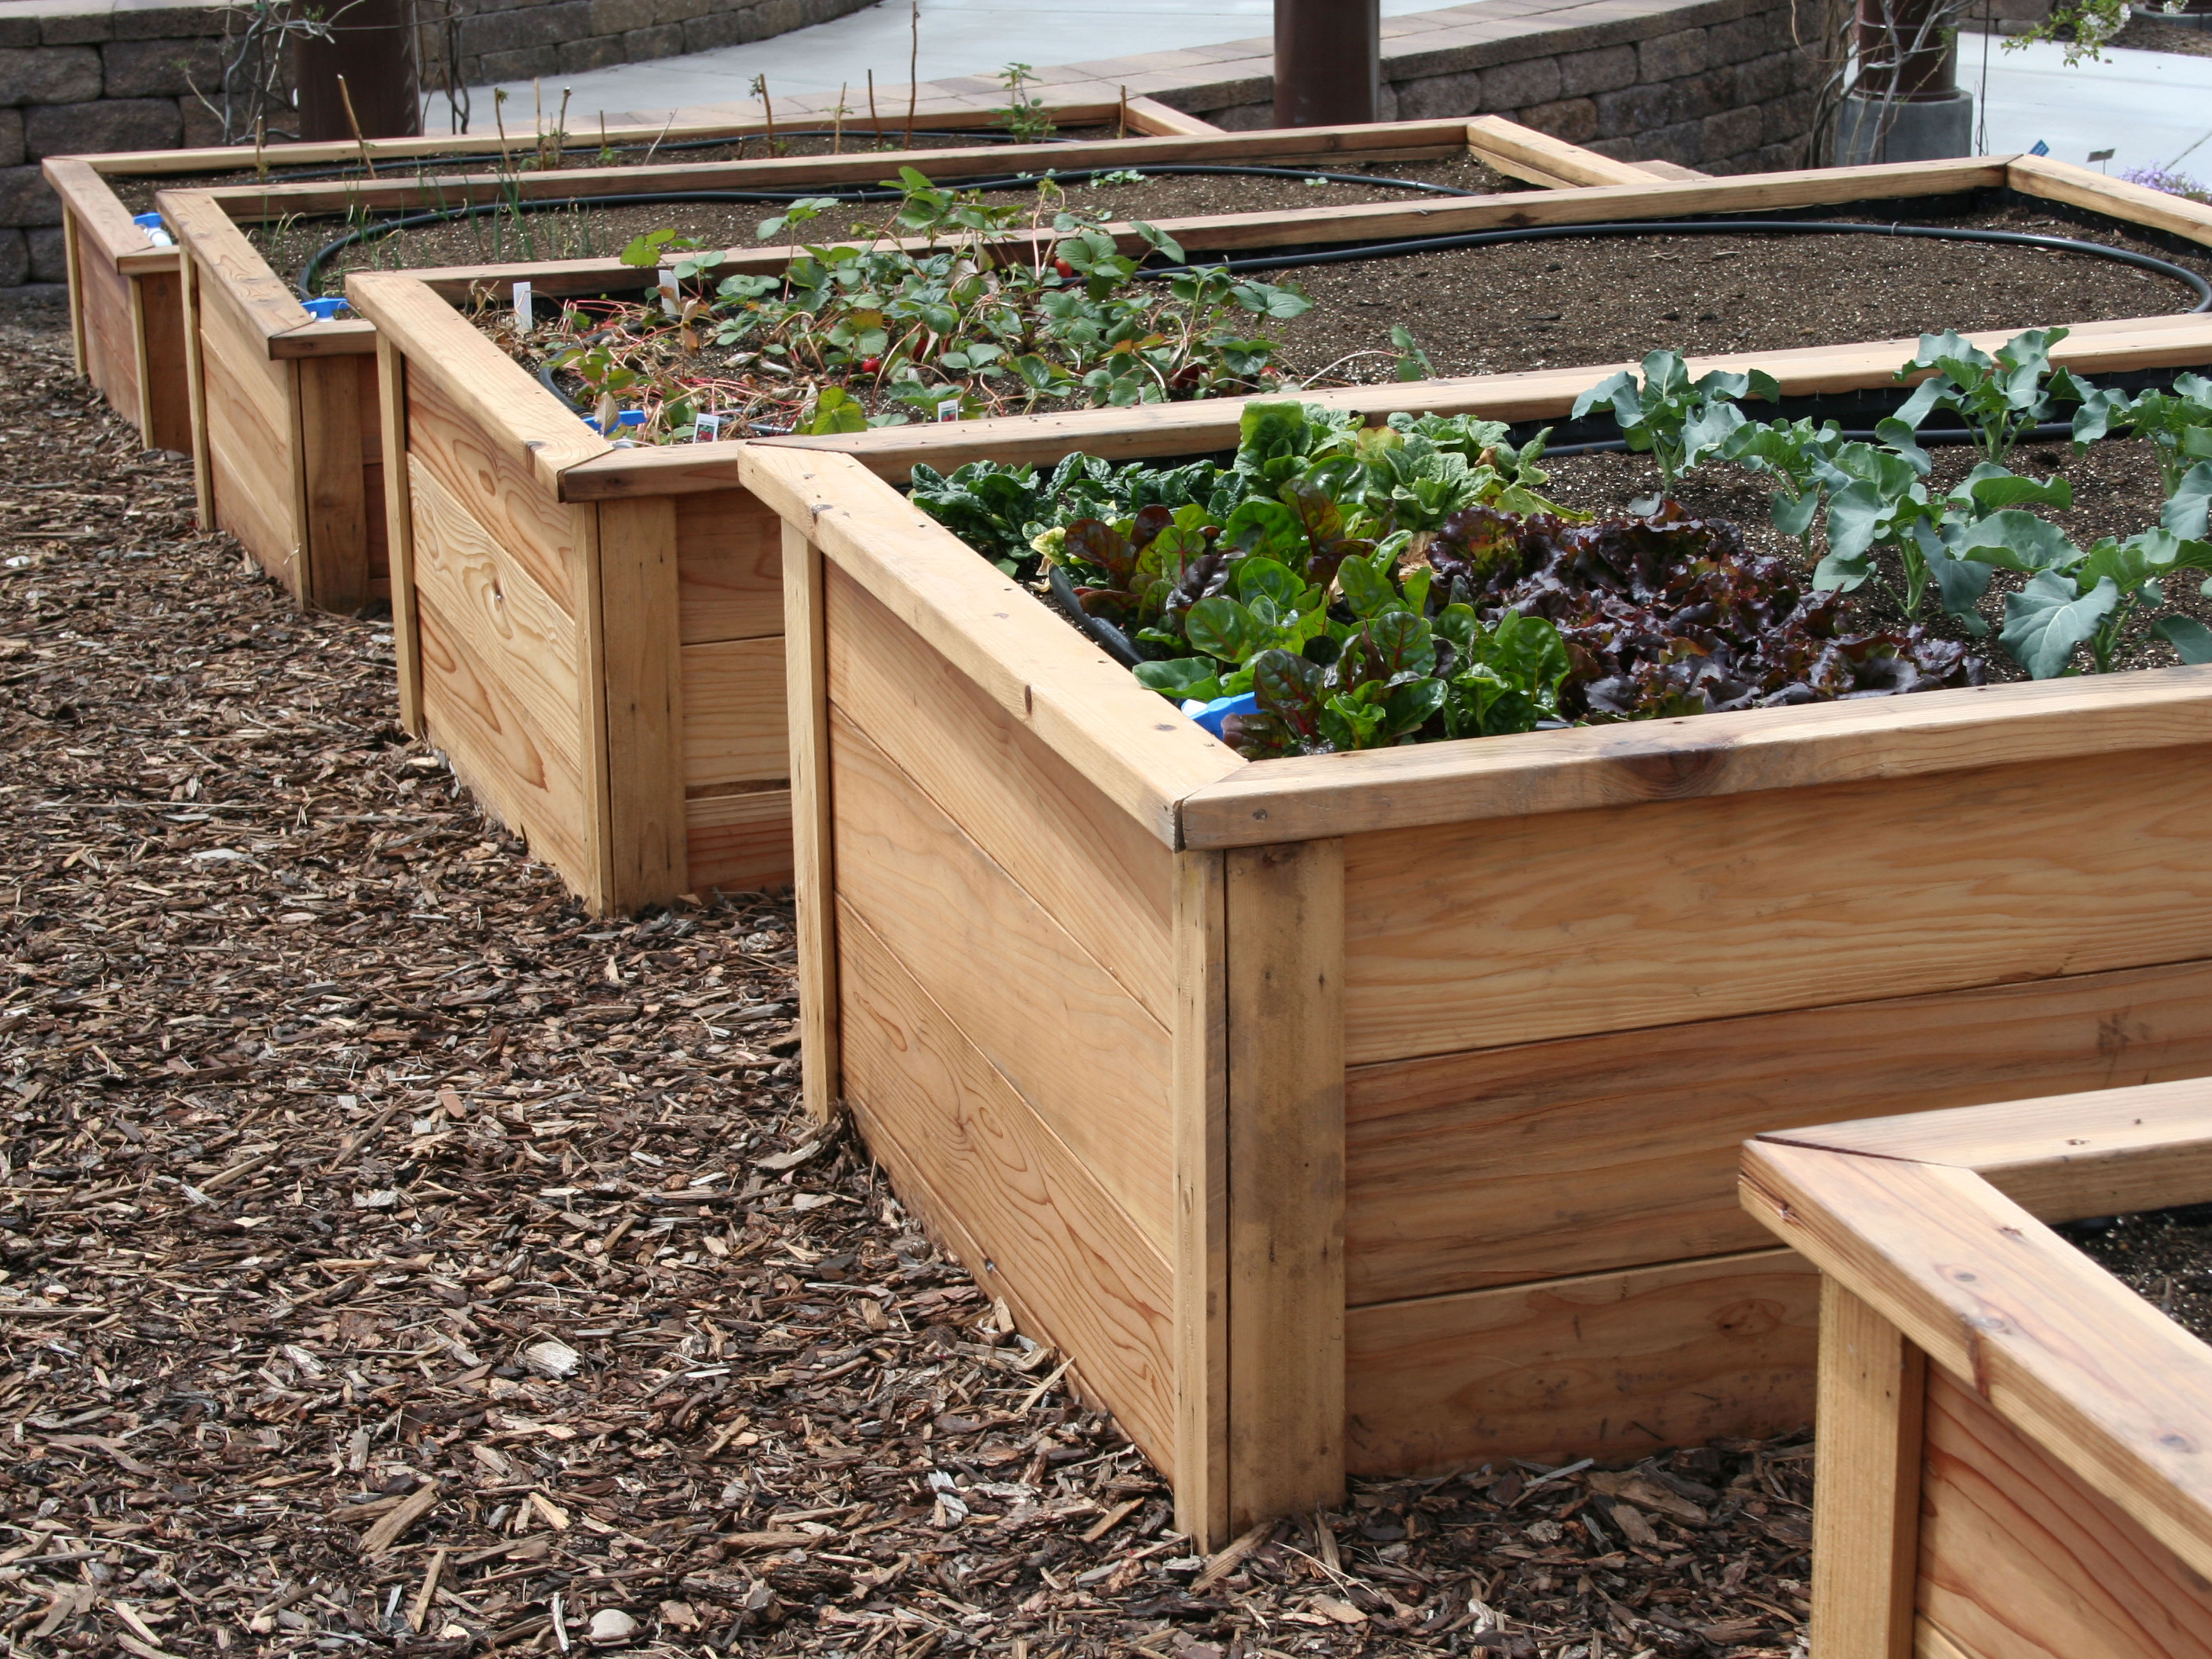 Wooden garden boxes with sprouting vegetables